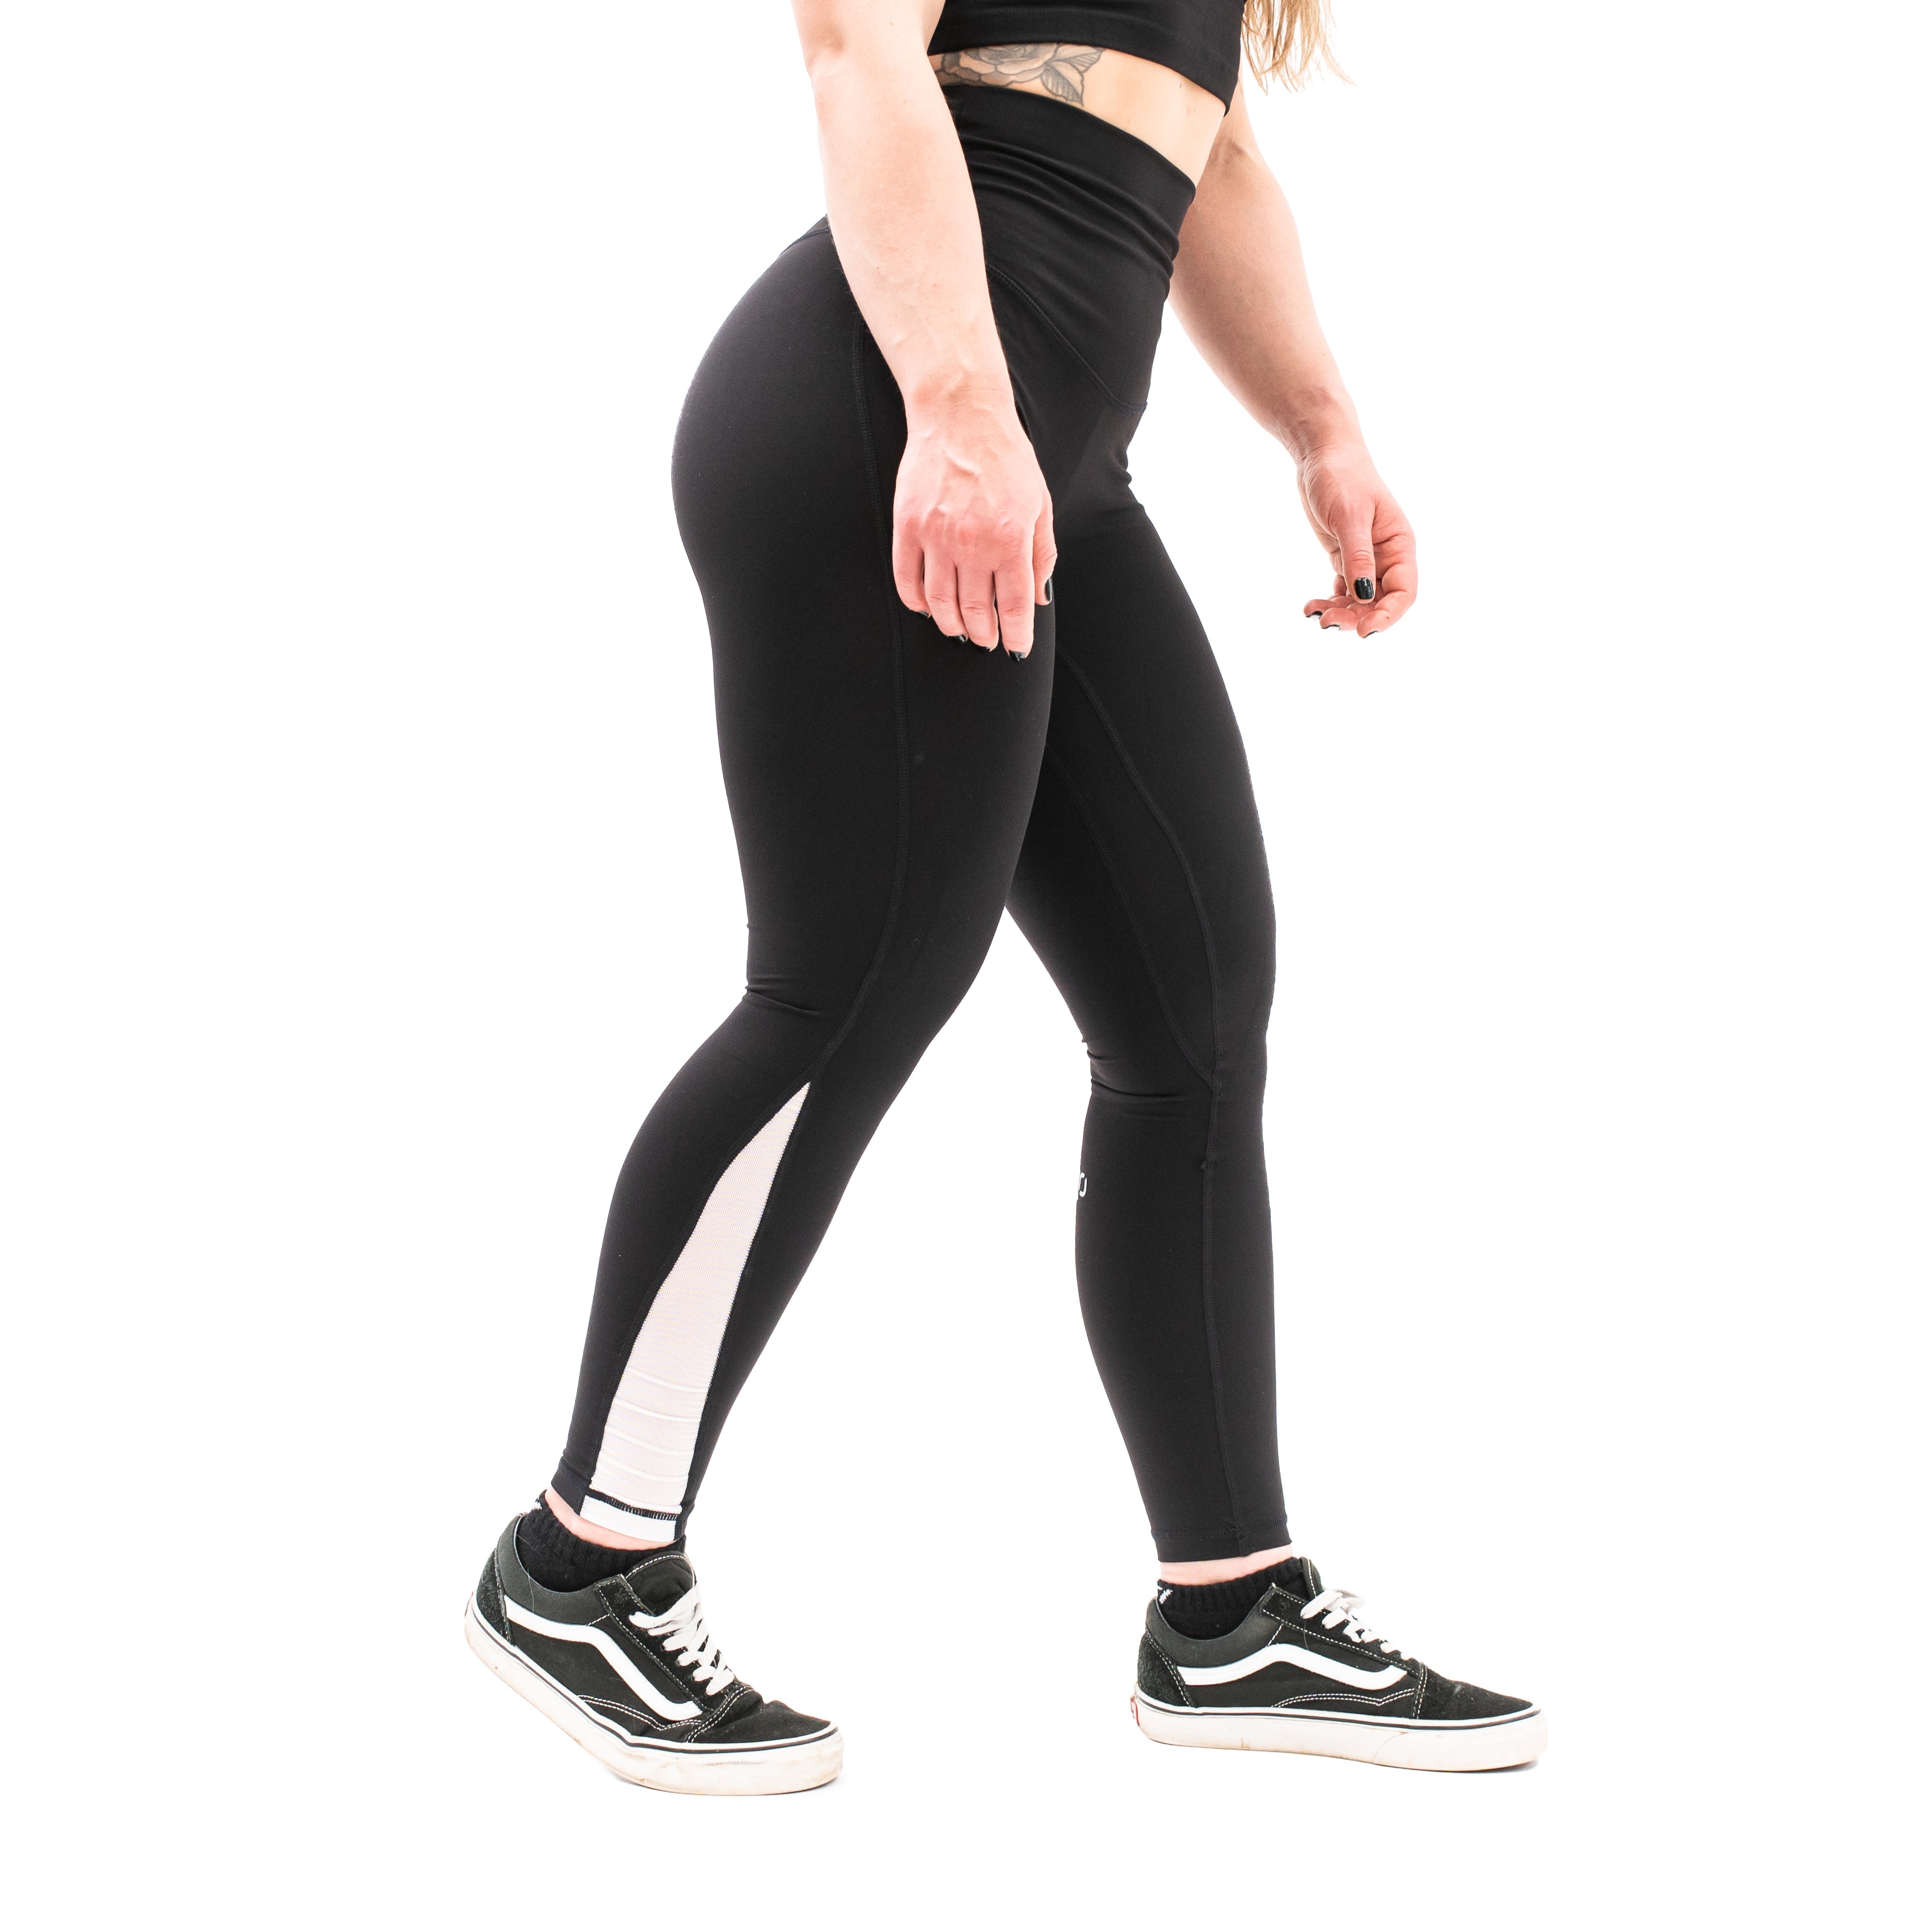 A7 XO Hew Leggings made from the same material as our XO Leggings, but are designed for 'thiccer' body types. The A7 XO Hew have high waistband to be more slimming around your waist and belly and have no seam line on the front for more comfortable movement. Purchase A7 XO Hew Leggings from A7 UK for shipping to UK and Europe. Women’s leggings for powerlifting and training in the gym. Weightlifting leggings for women. 